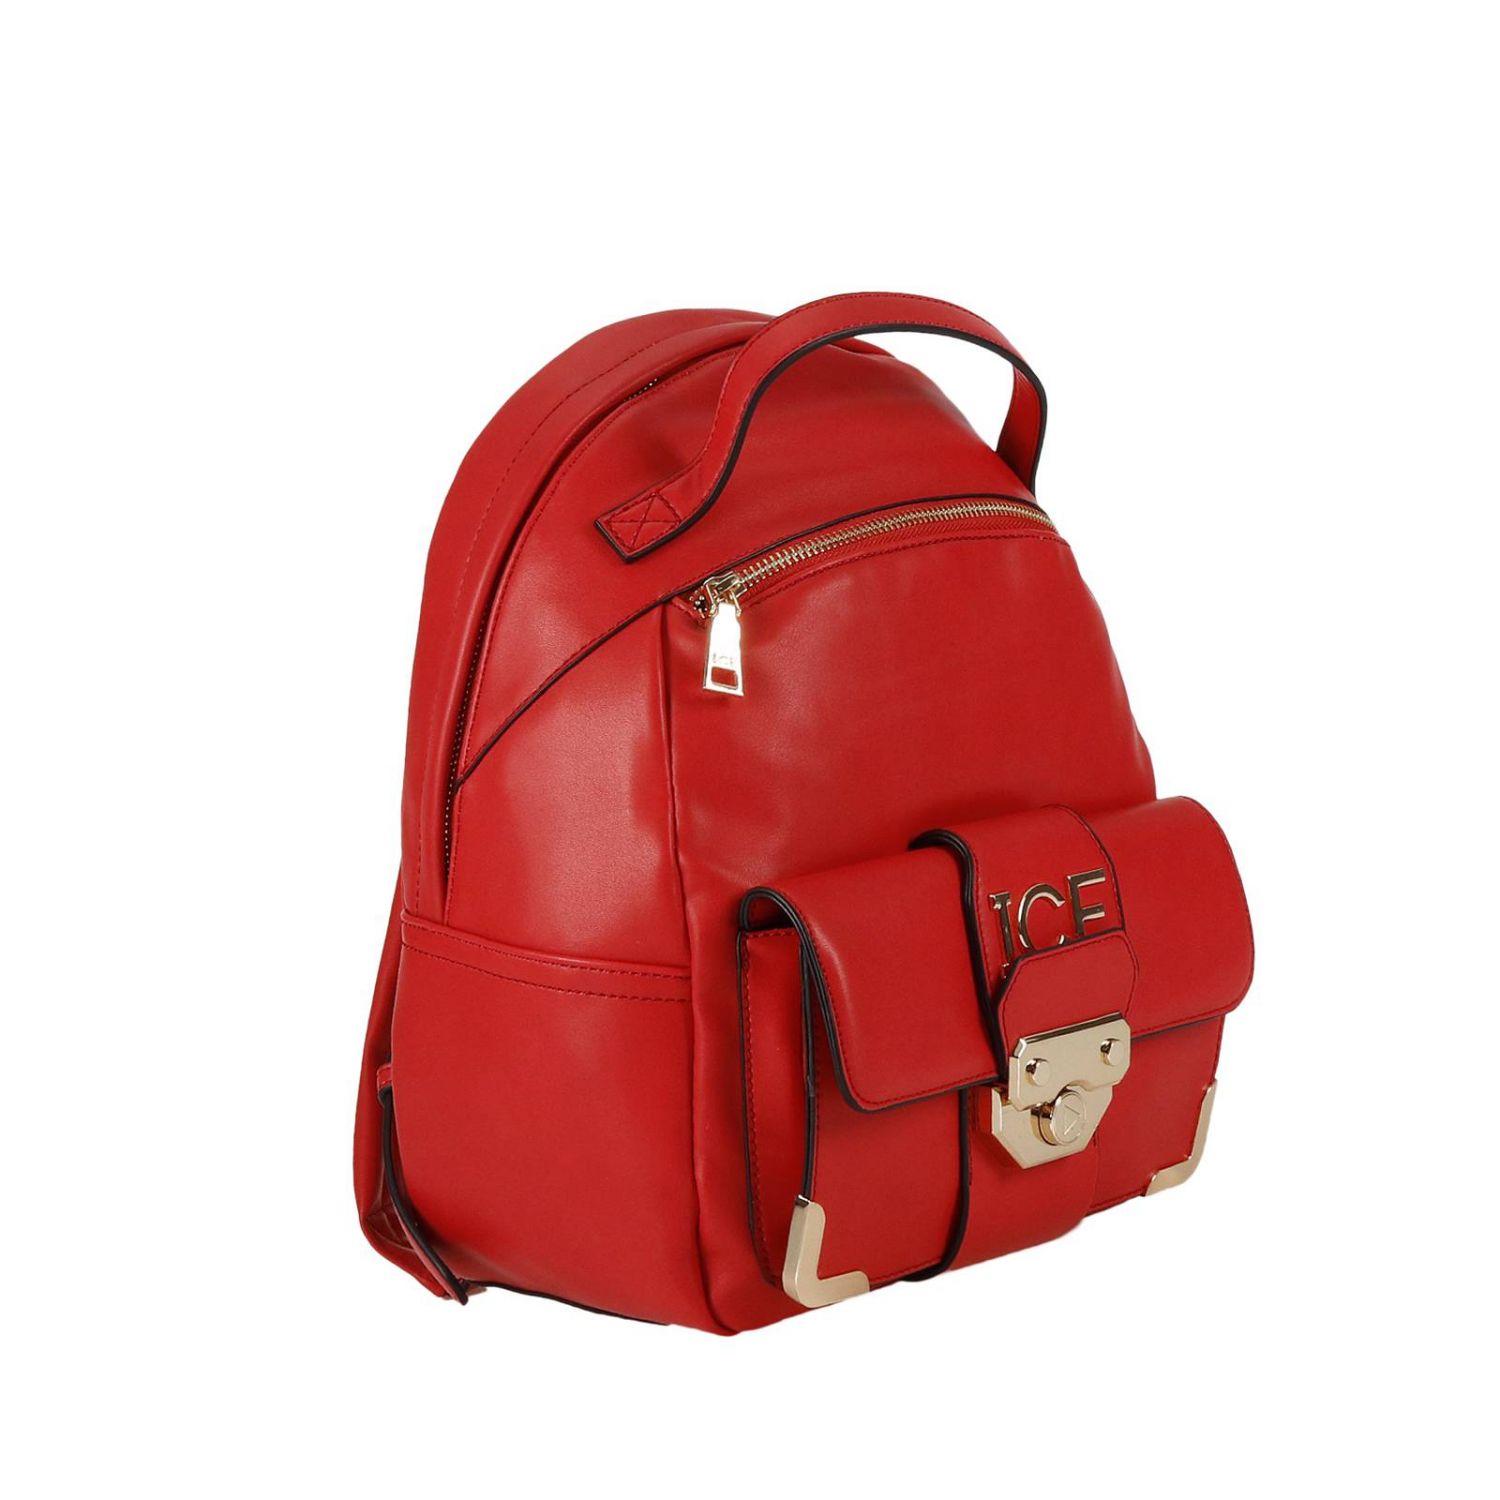 Ice Play Outlet: Shoulder bag women - Red | Backpack Ice Play 7230 6966 ...